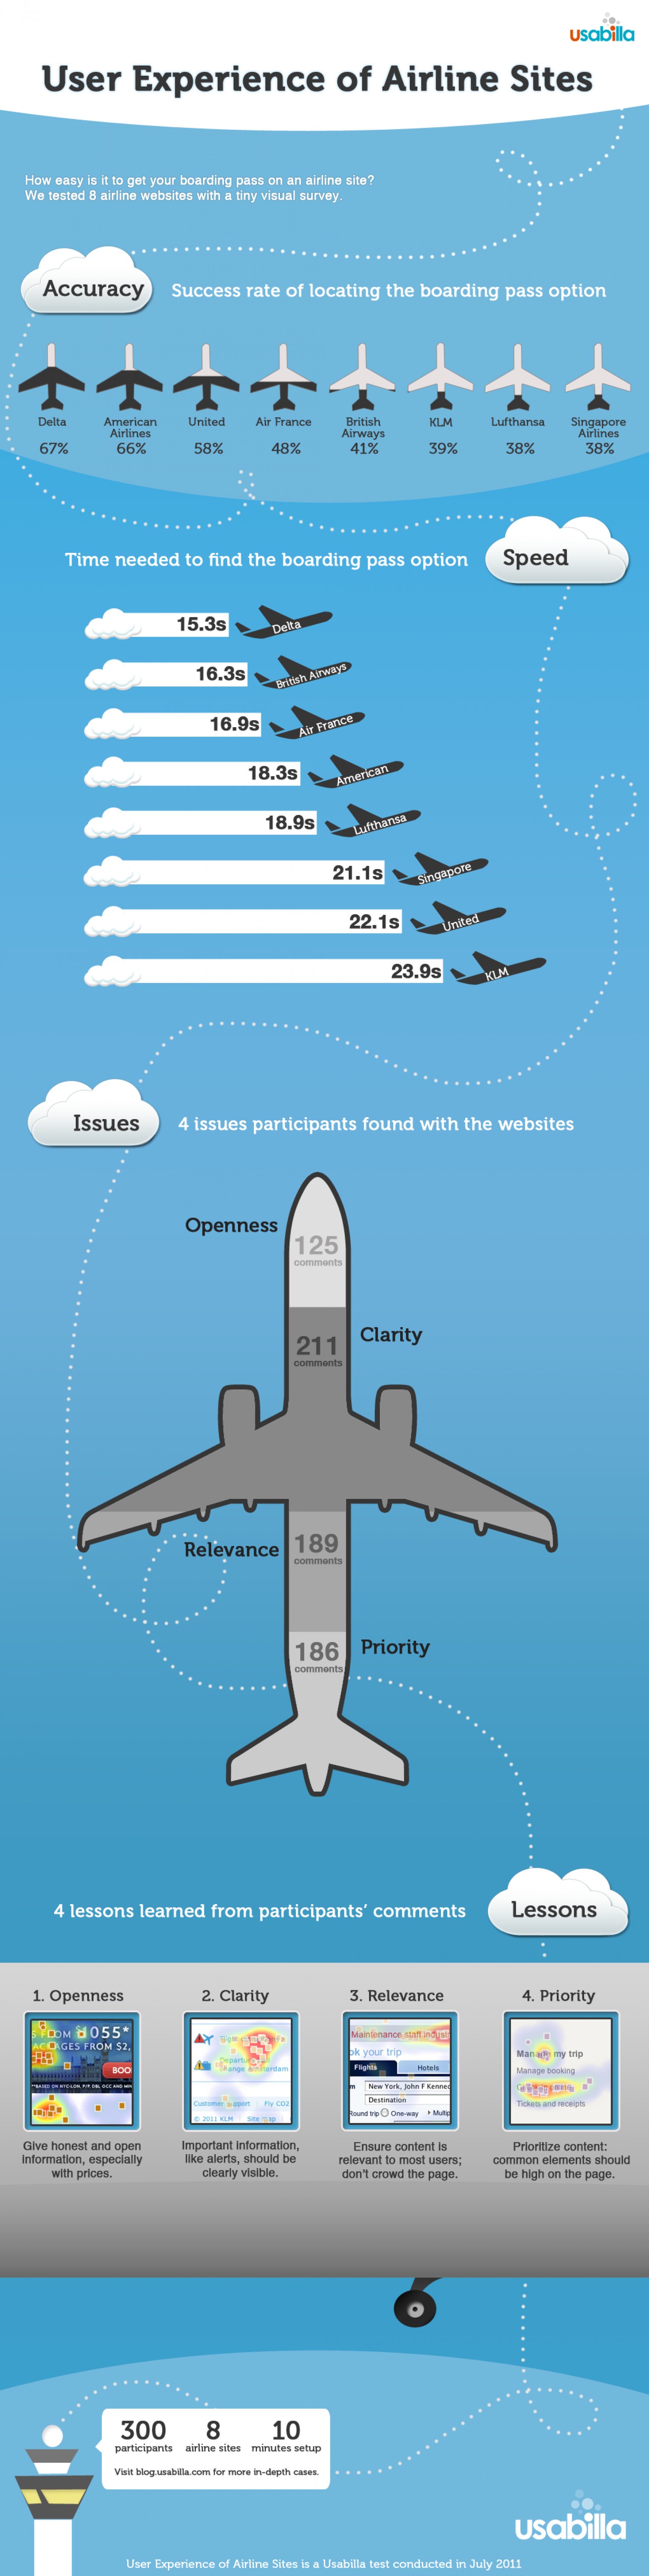 13. User experience of Airline sites